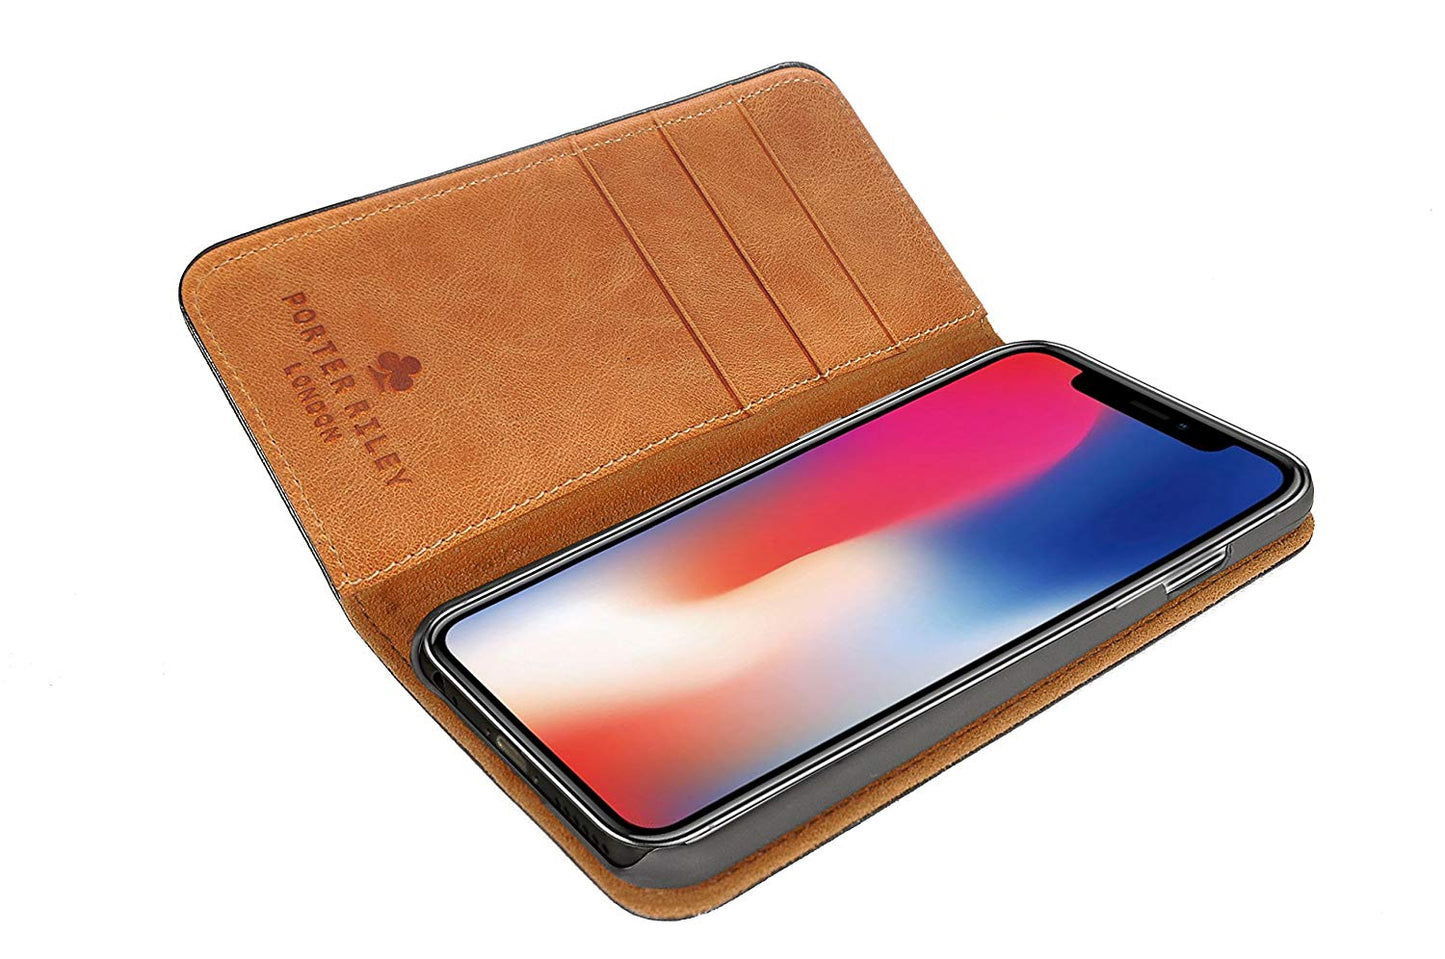 iPhone XS / X Leather Case. Premium Slim Genuine Leather Stand Case/Cover/Wallet (Black & Tan)